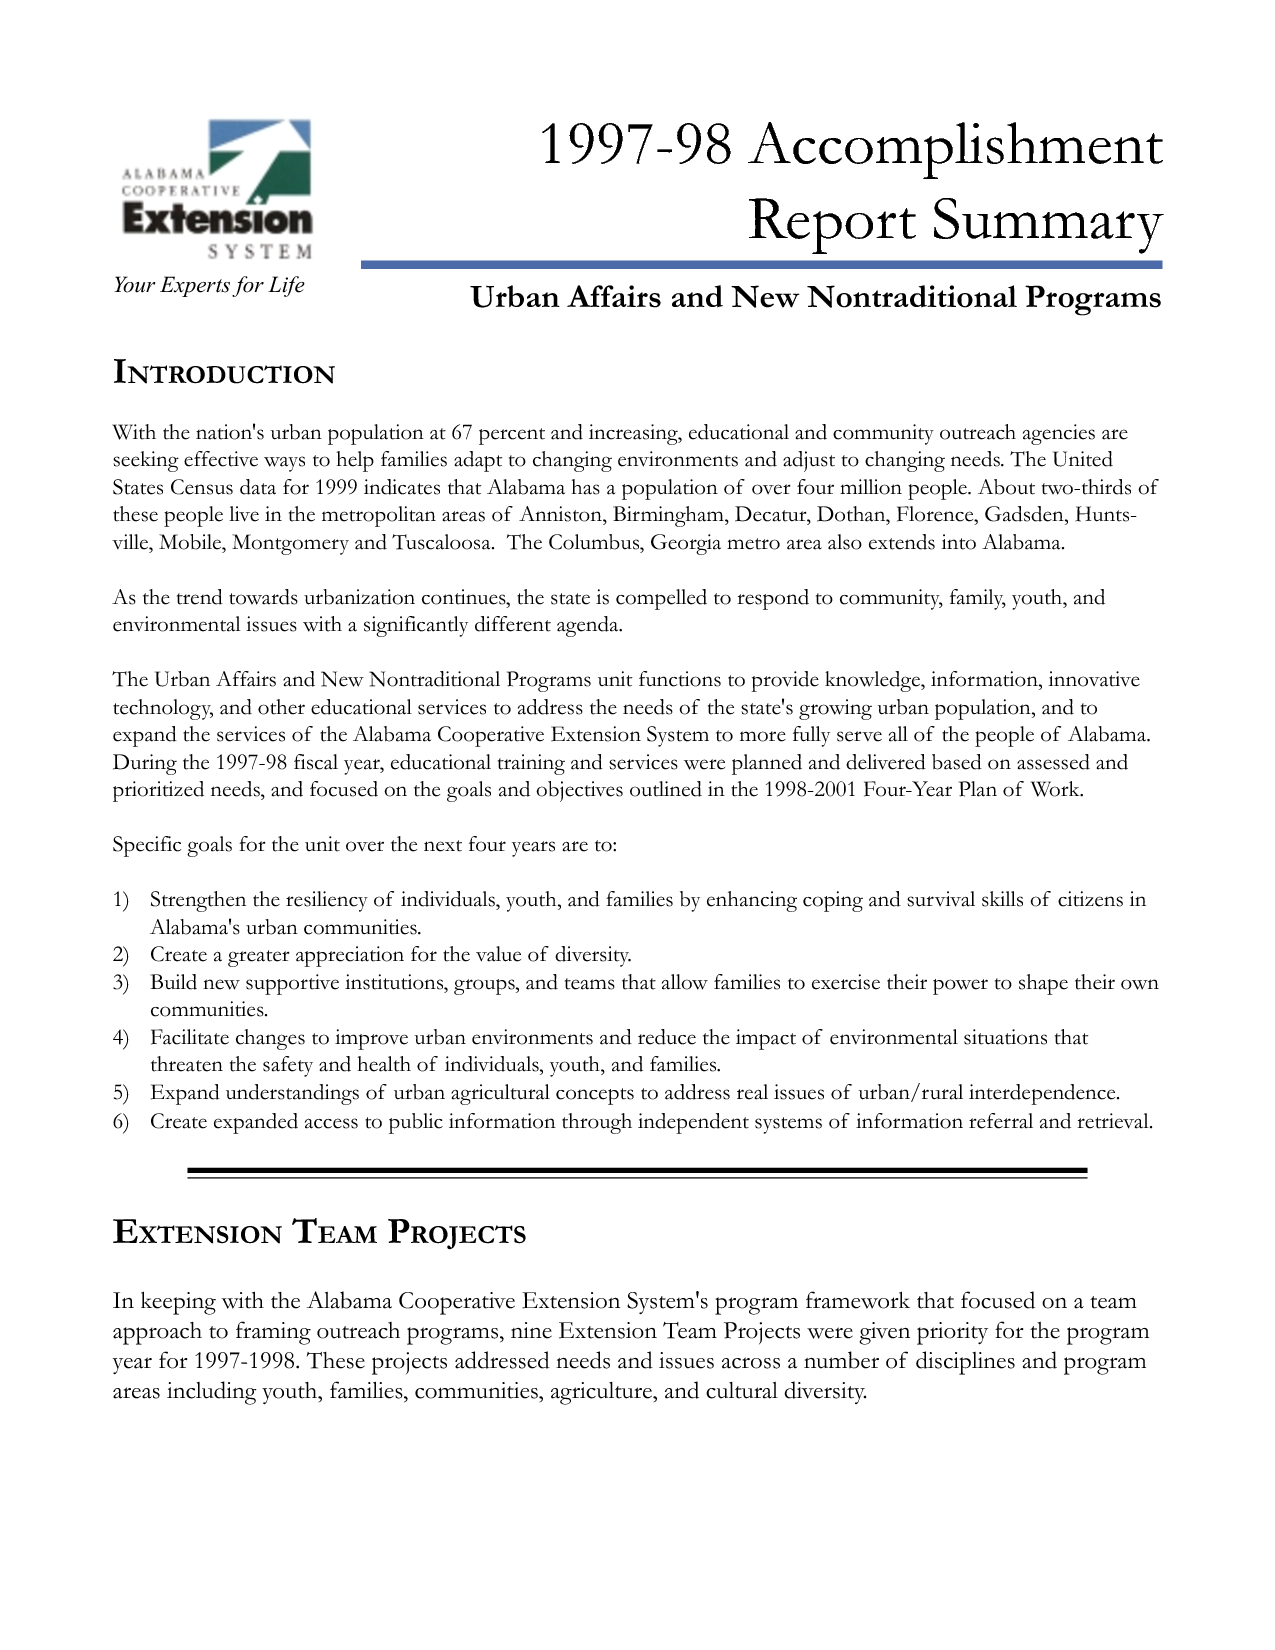 Free Annual Accomplishment Report Summary Sample : V M D Inside Summary Annual Report Template